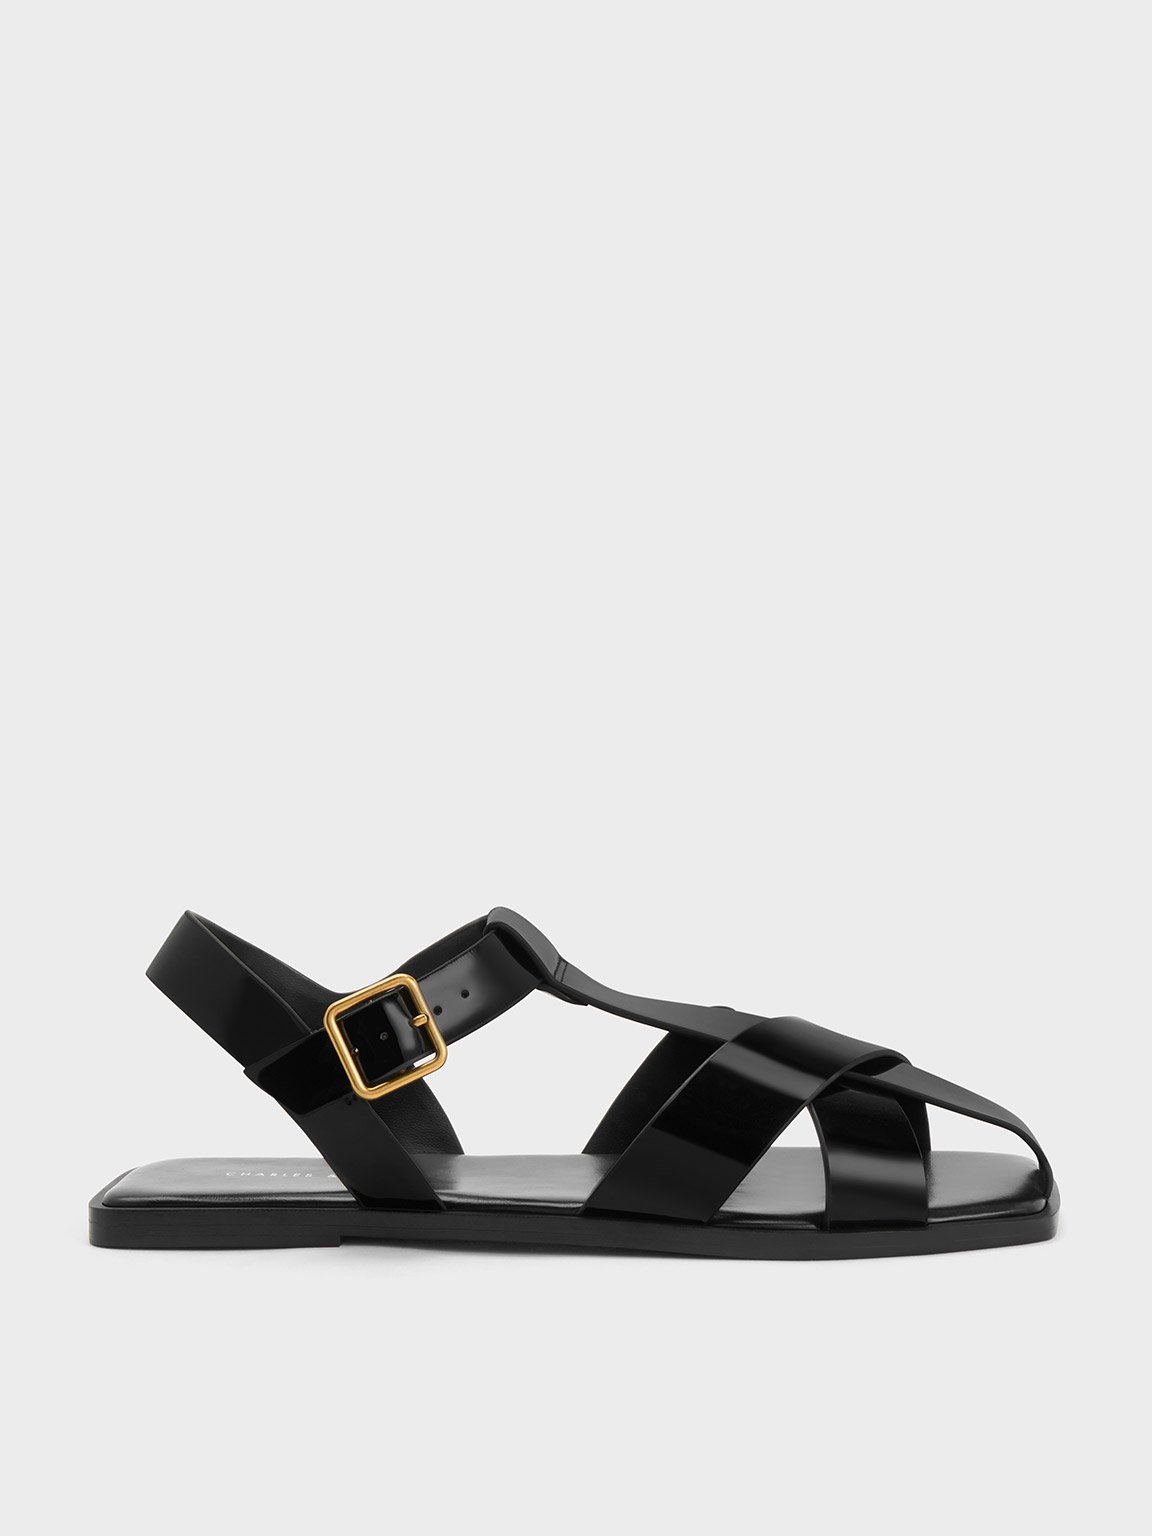 Charles & Keith Patent Strappy Crossover Sandals In Black Patent